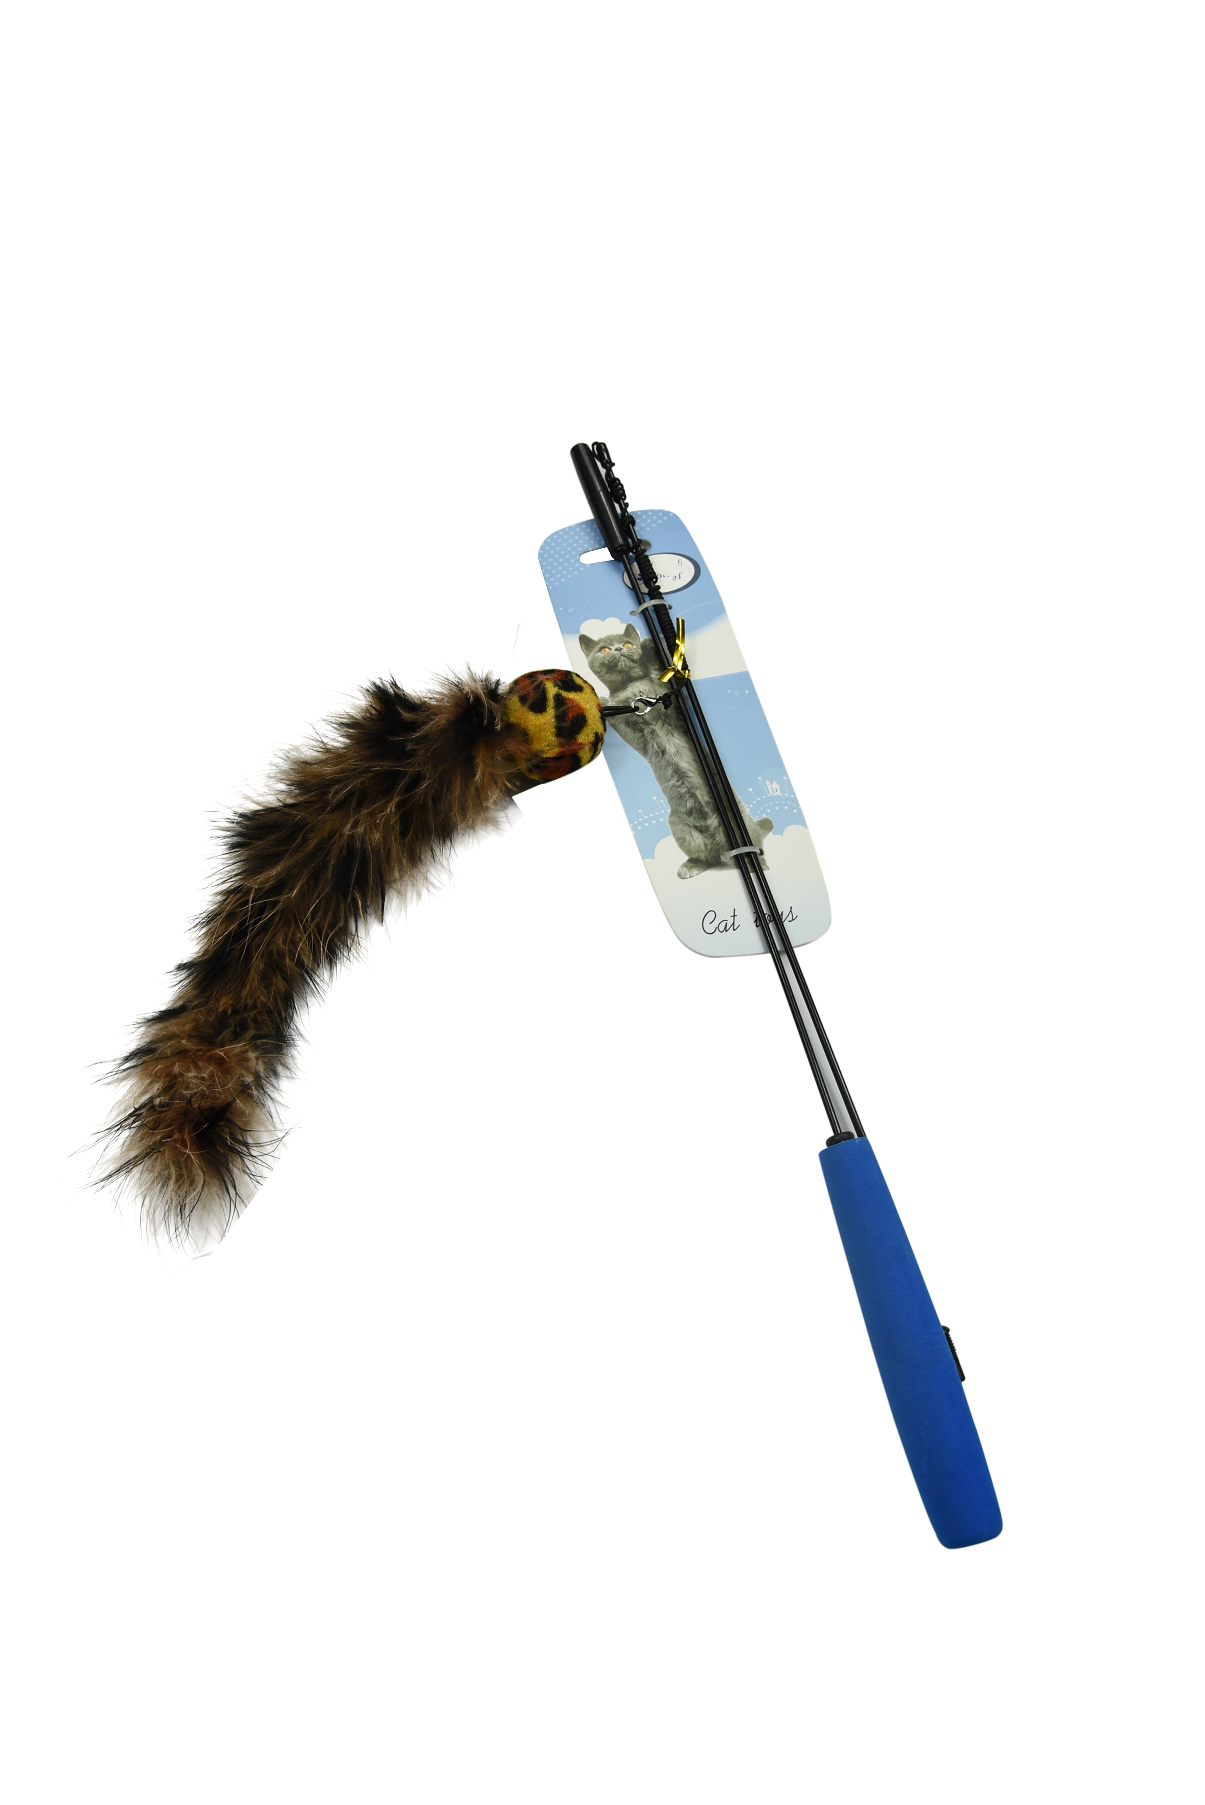 Telescopic cat swing toy Wand toy  with long fur ball tail for Kat,kitty